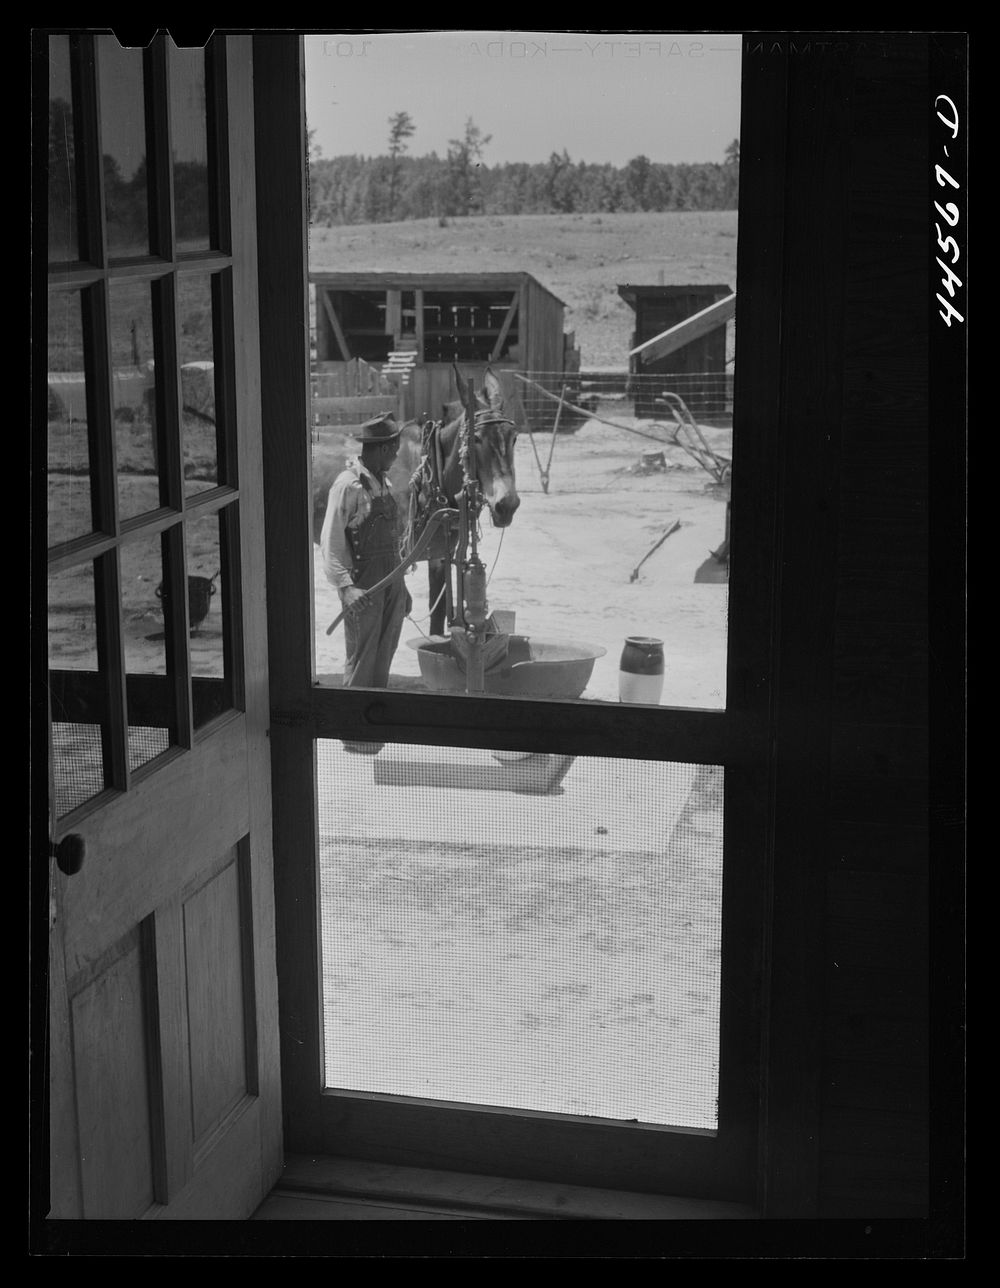 Screen door at the home of tenant purchase client Robert McKiver. Showing FSA (Farm Security Administration) pump in back.…